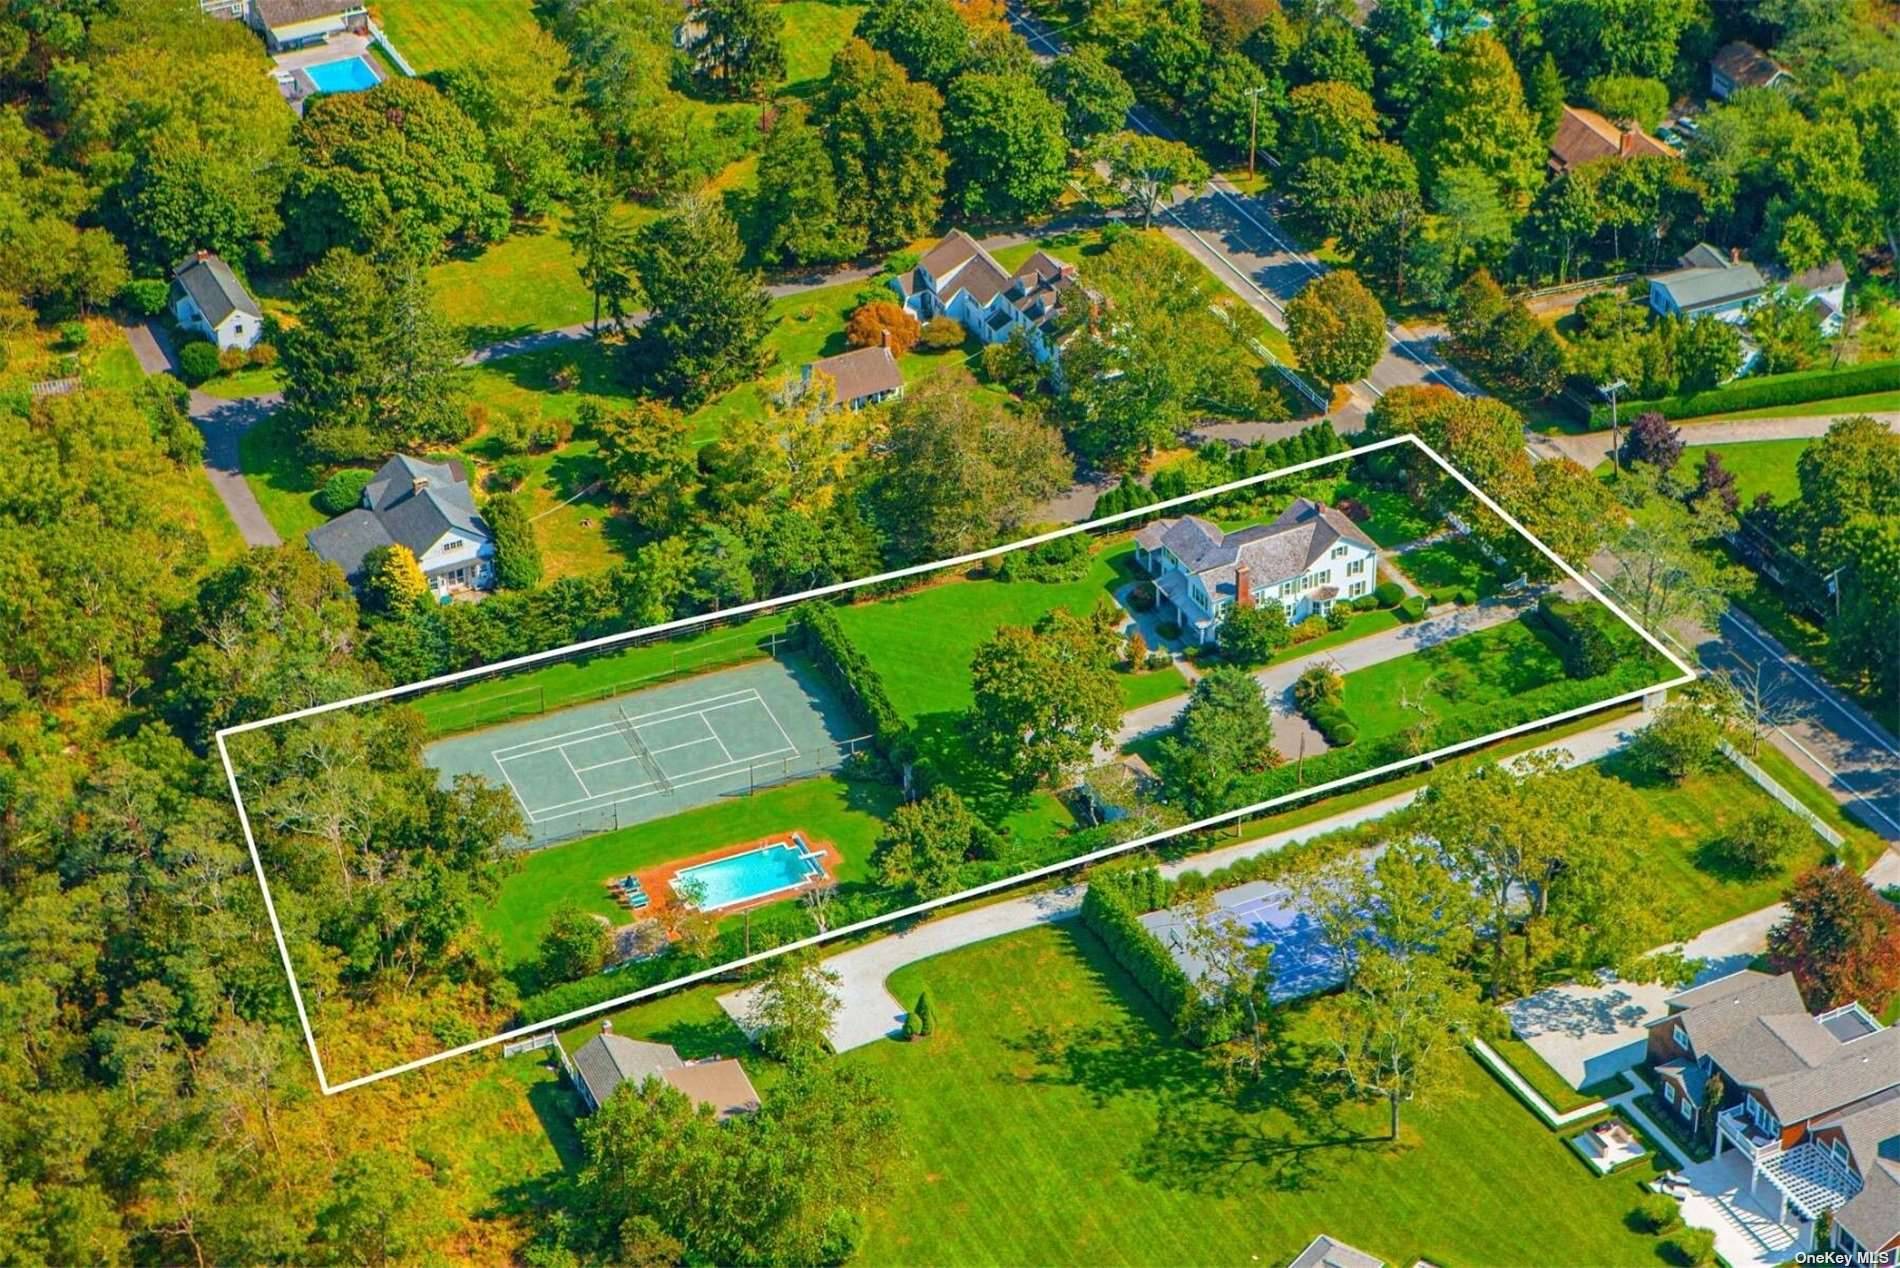 Historic, Gated Country Estate with Gunite Pool, Tennis Court amp ; Cabana This extraordinary property has a movie set quality, with theatrical flourishes both inside and out.